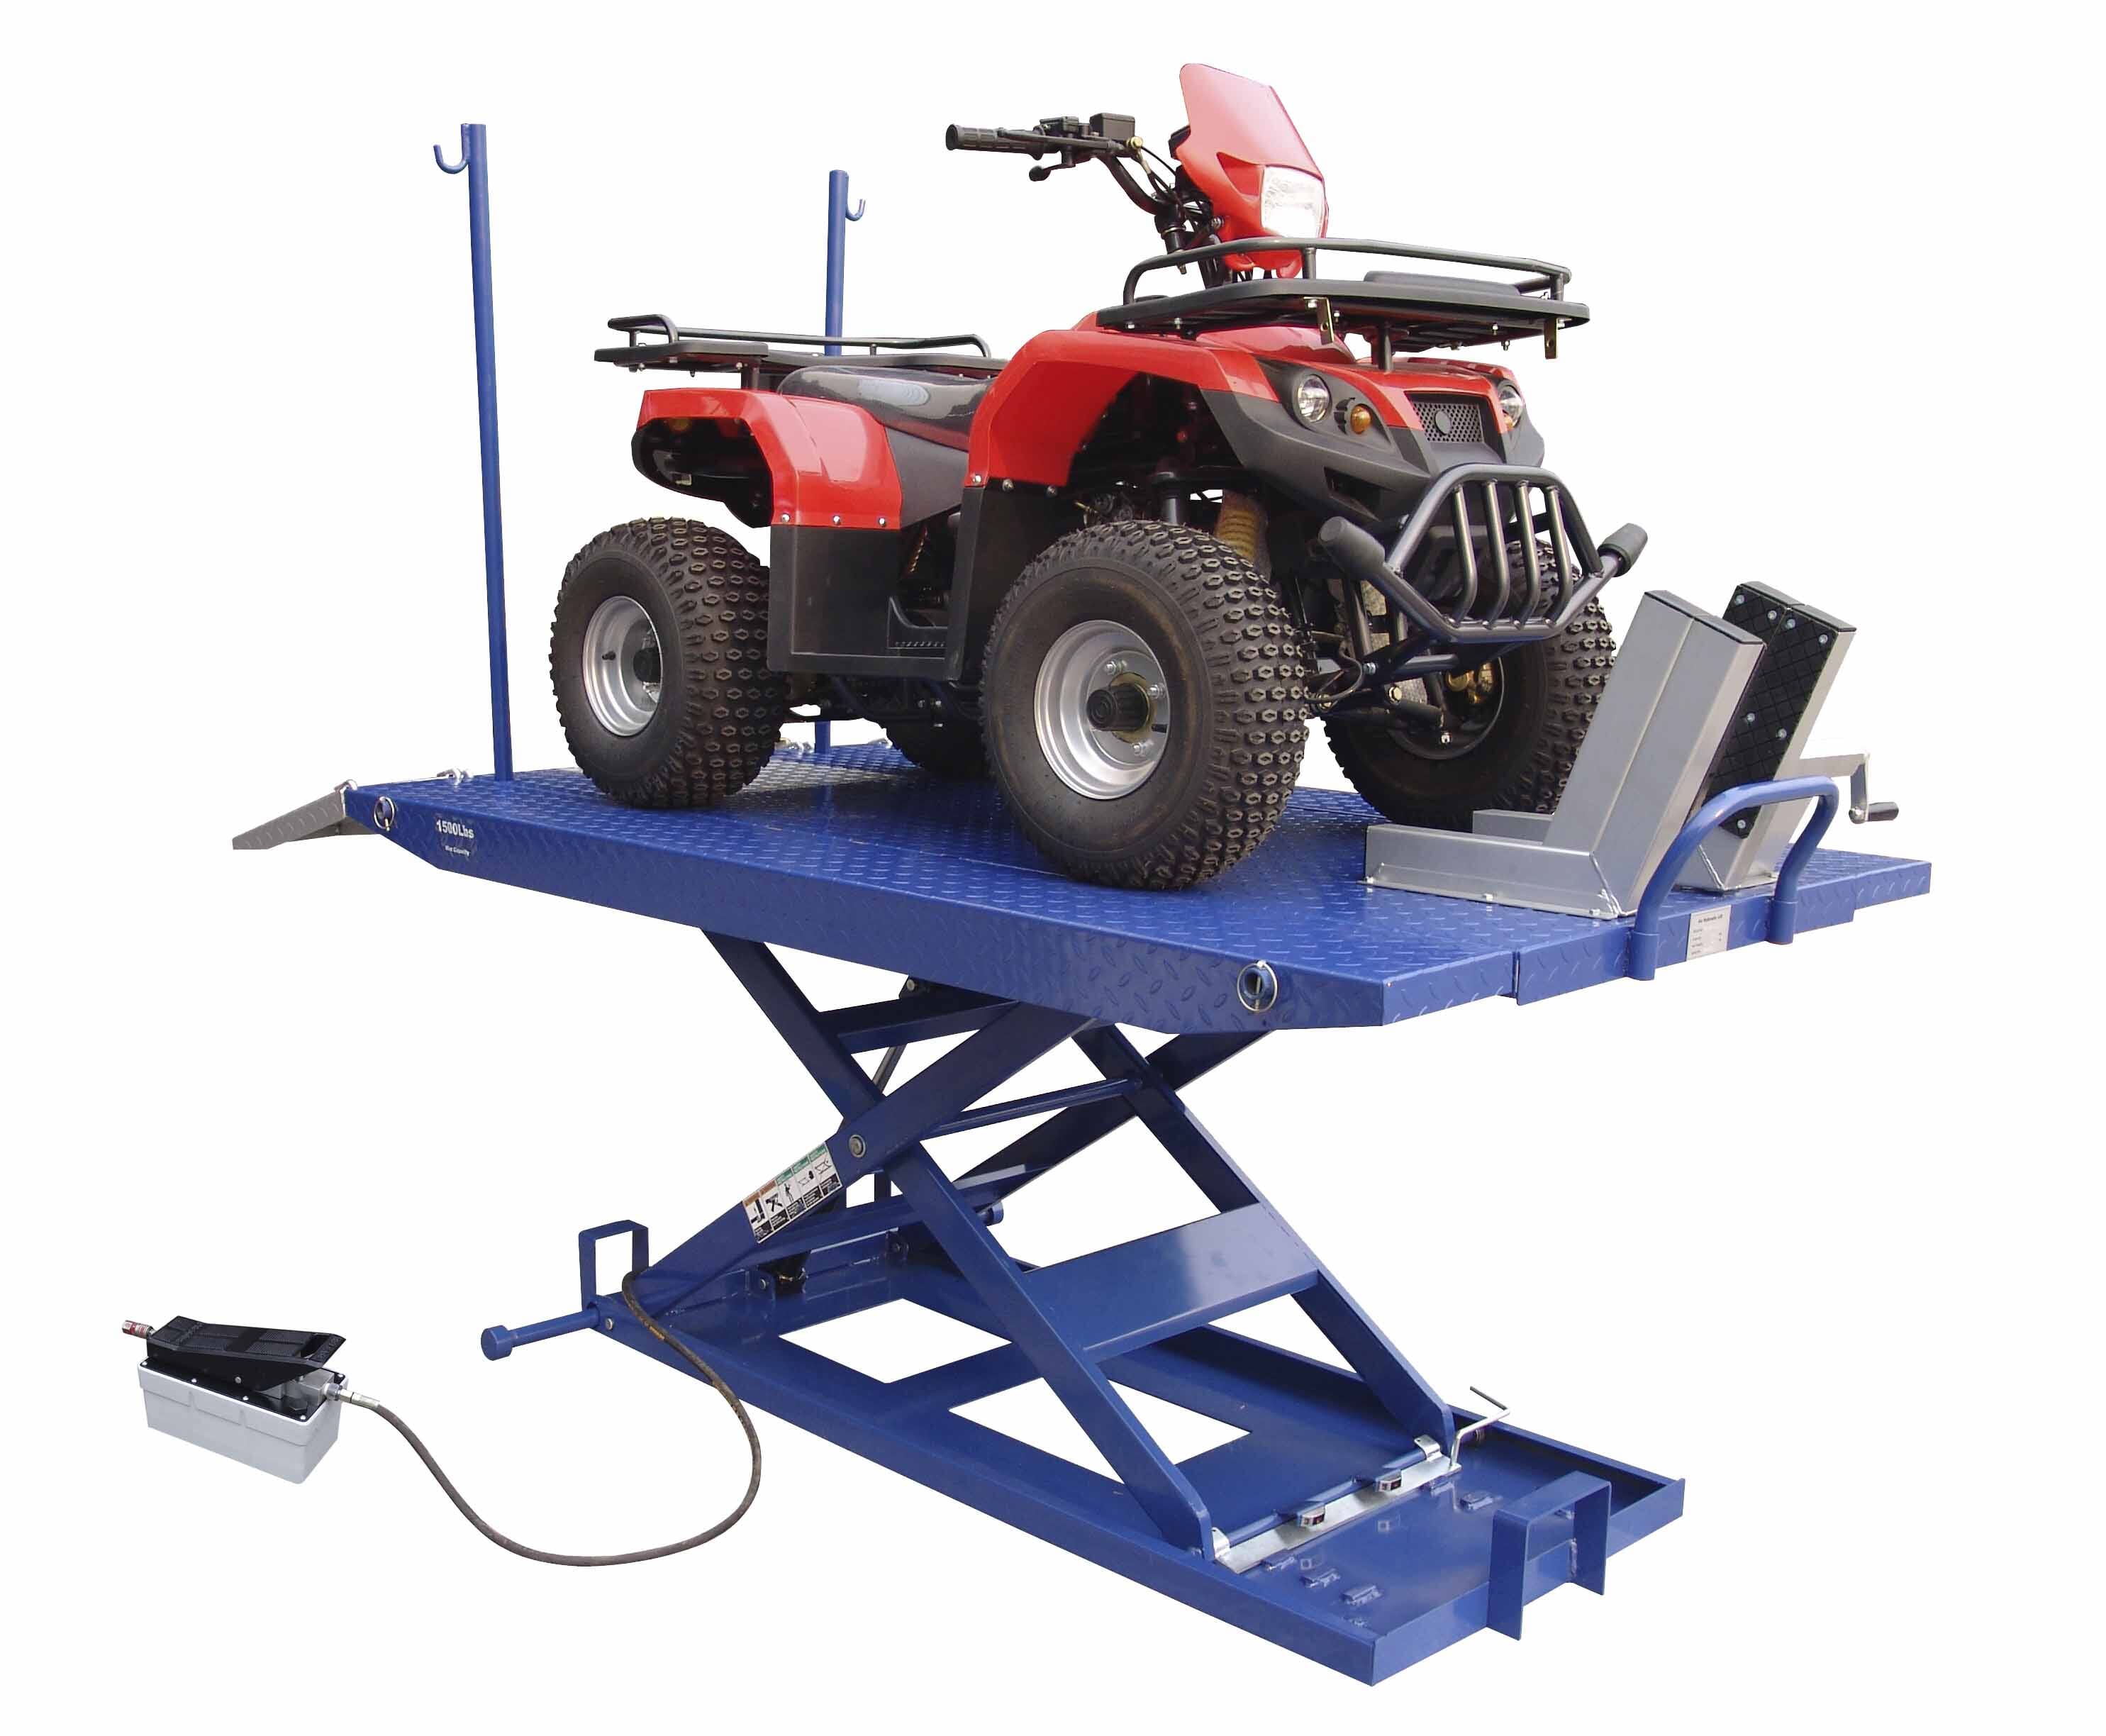 Wayco Air / Hydraulic Motorcycle and Quad Bike Lifter 500kg